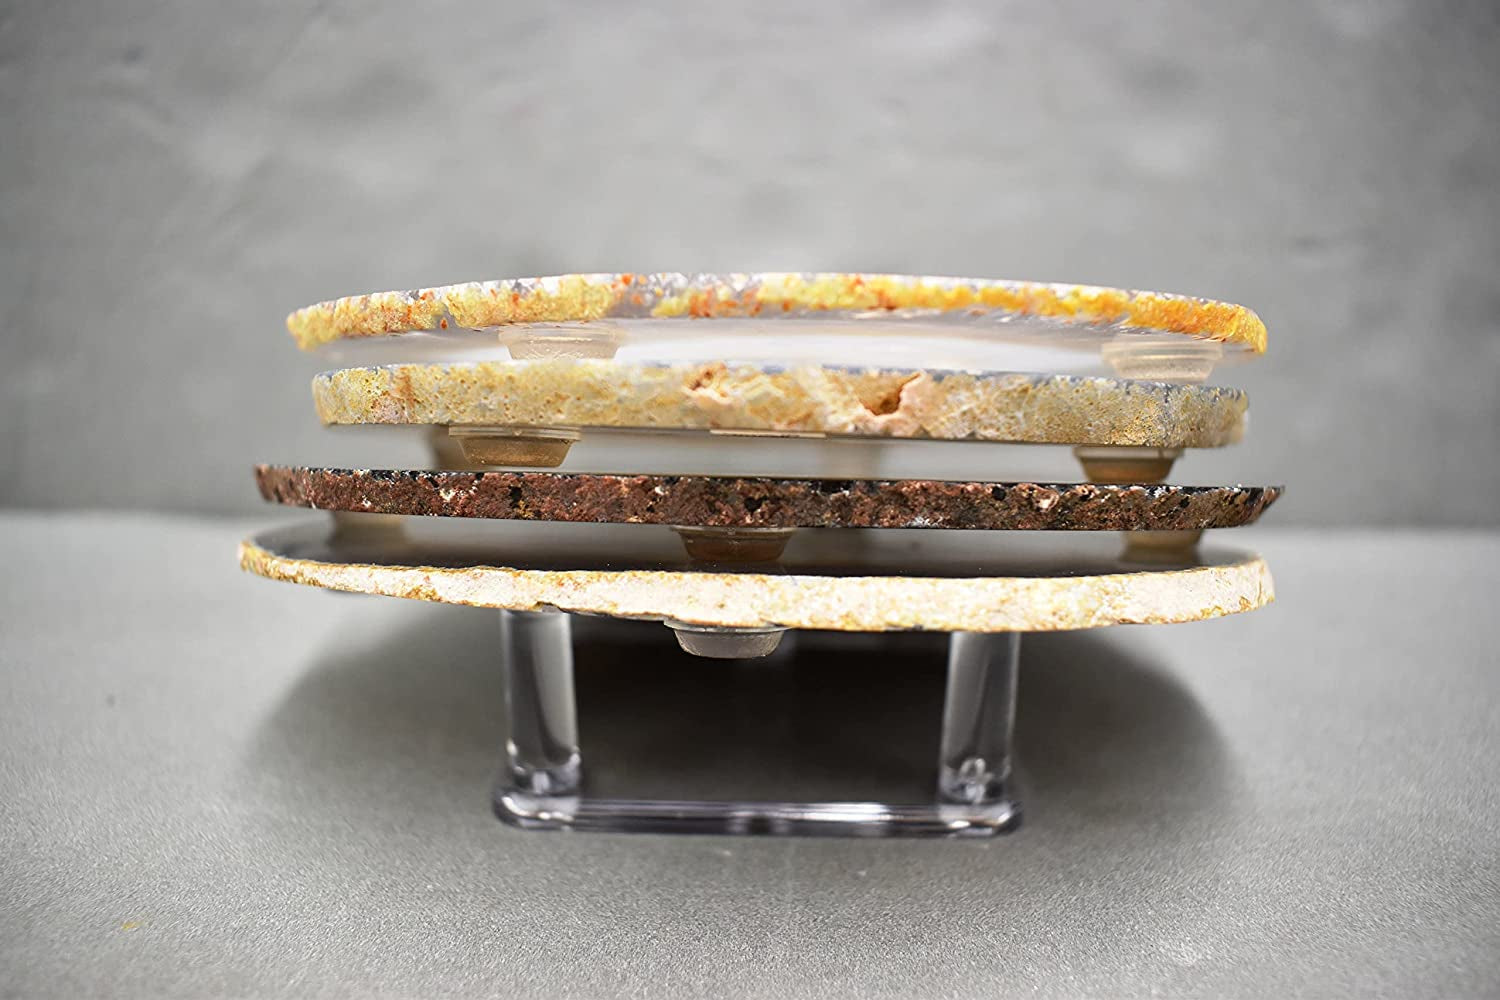 Premium Brown Agate Coasters - Set of 4, Genuine Stone Table Mats for Dining & Drinks Coffee Table & Kitchen Geode Decor Non-Toxic 4.5-5" Diameter